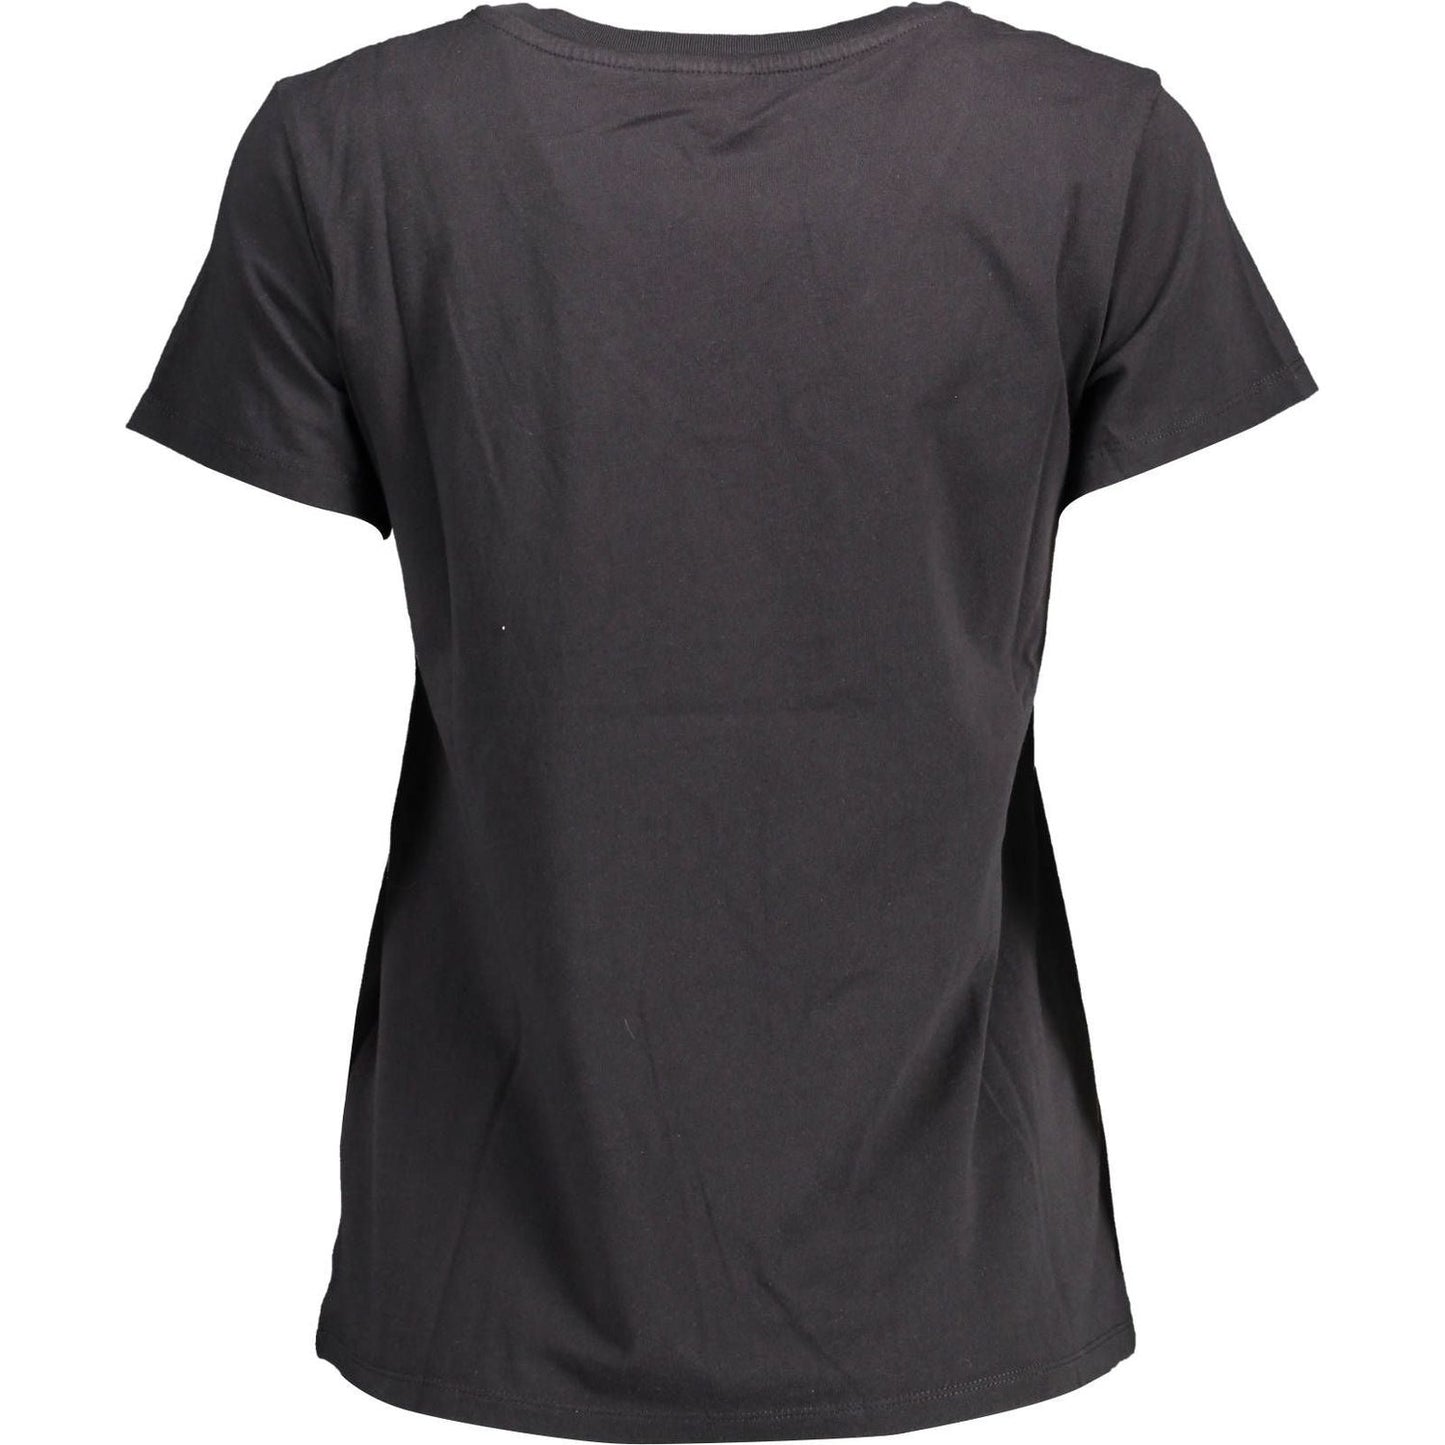 Levi's Chic V-Neck Cotton Tee with Emblematic Appeal chic-v-neck-cotton-tee-with-emblematic-appeal